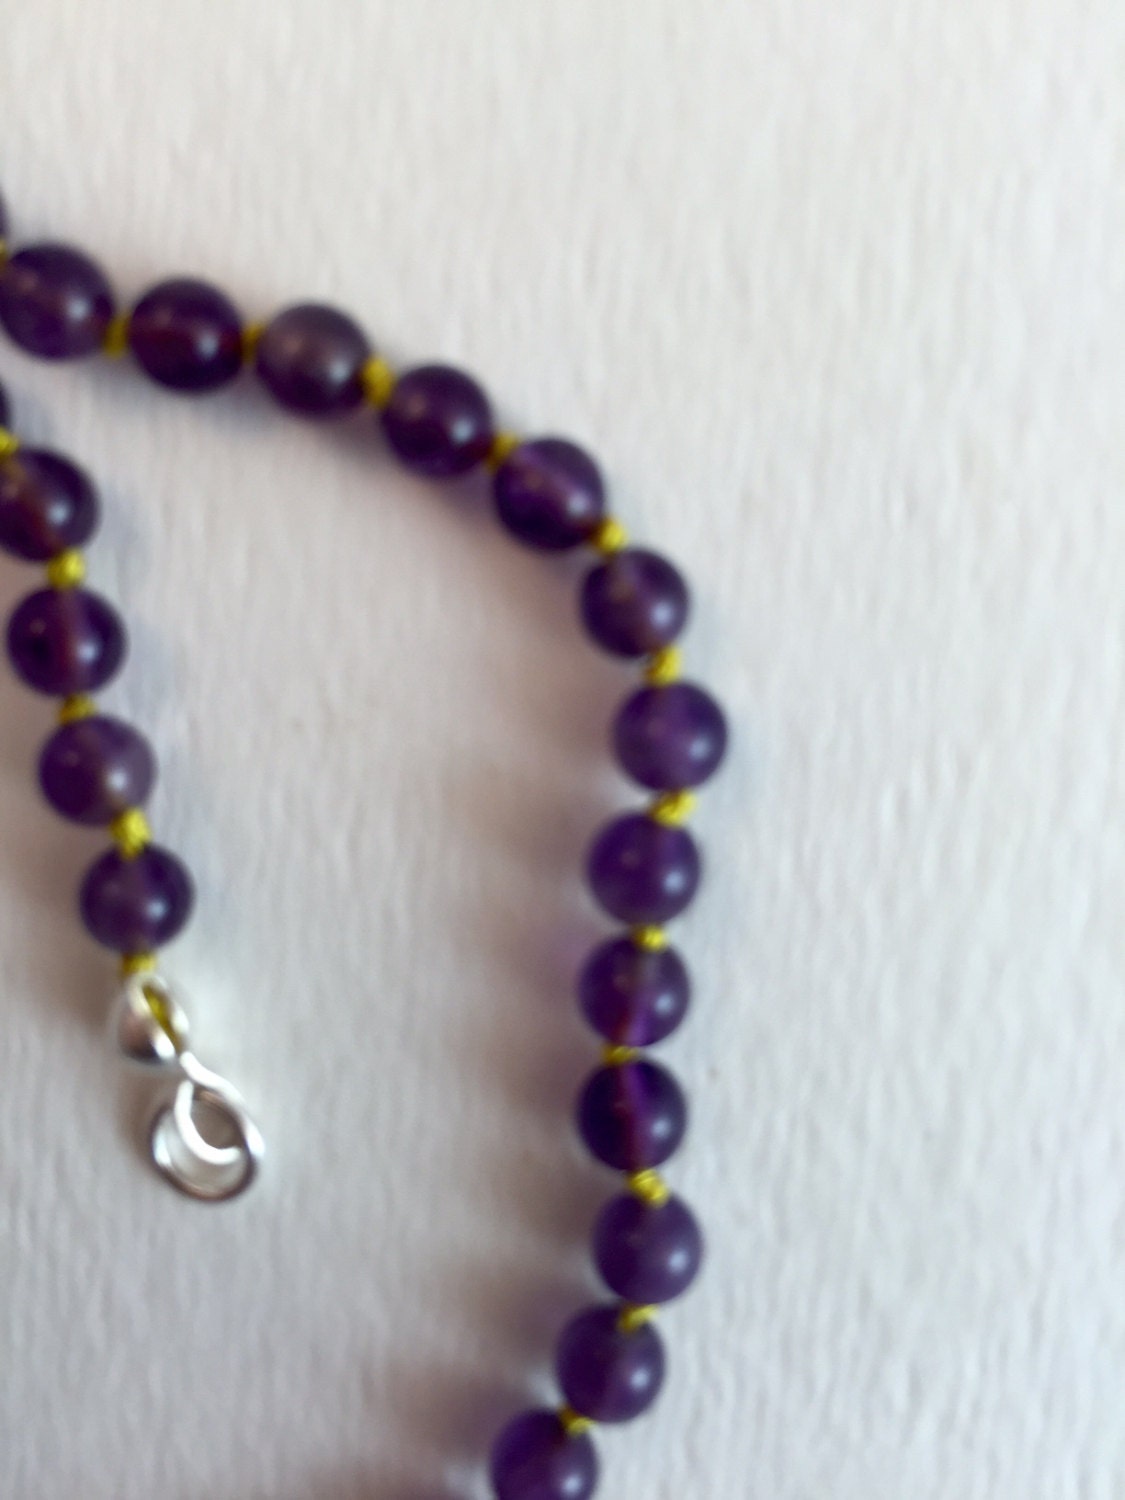 Children's treasured amethyst beaded necklace. Sweet as can be with contrasting yellow knotted thread. I measures 11 1/2 " long.